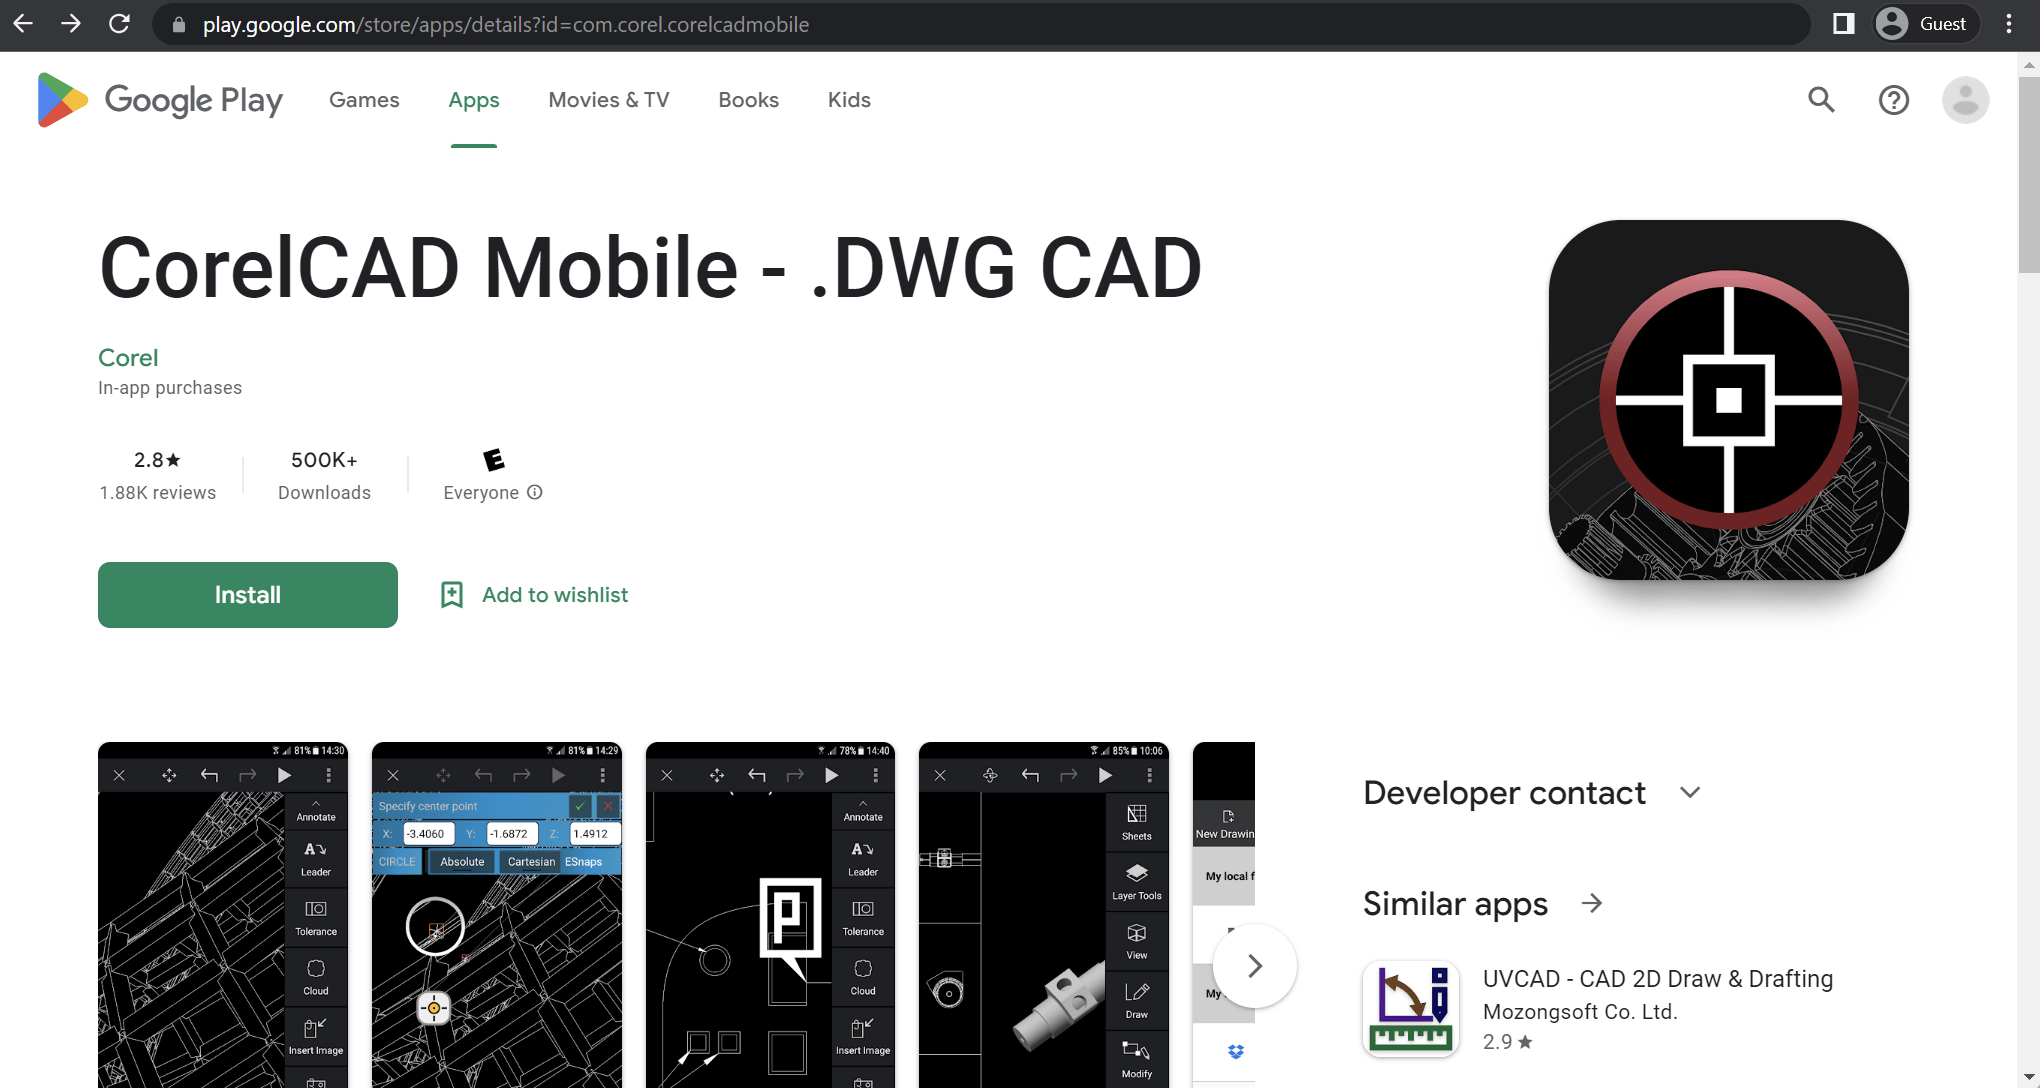 corelcad mobile android app landing page